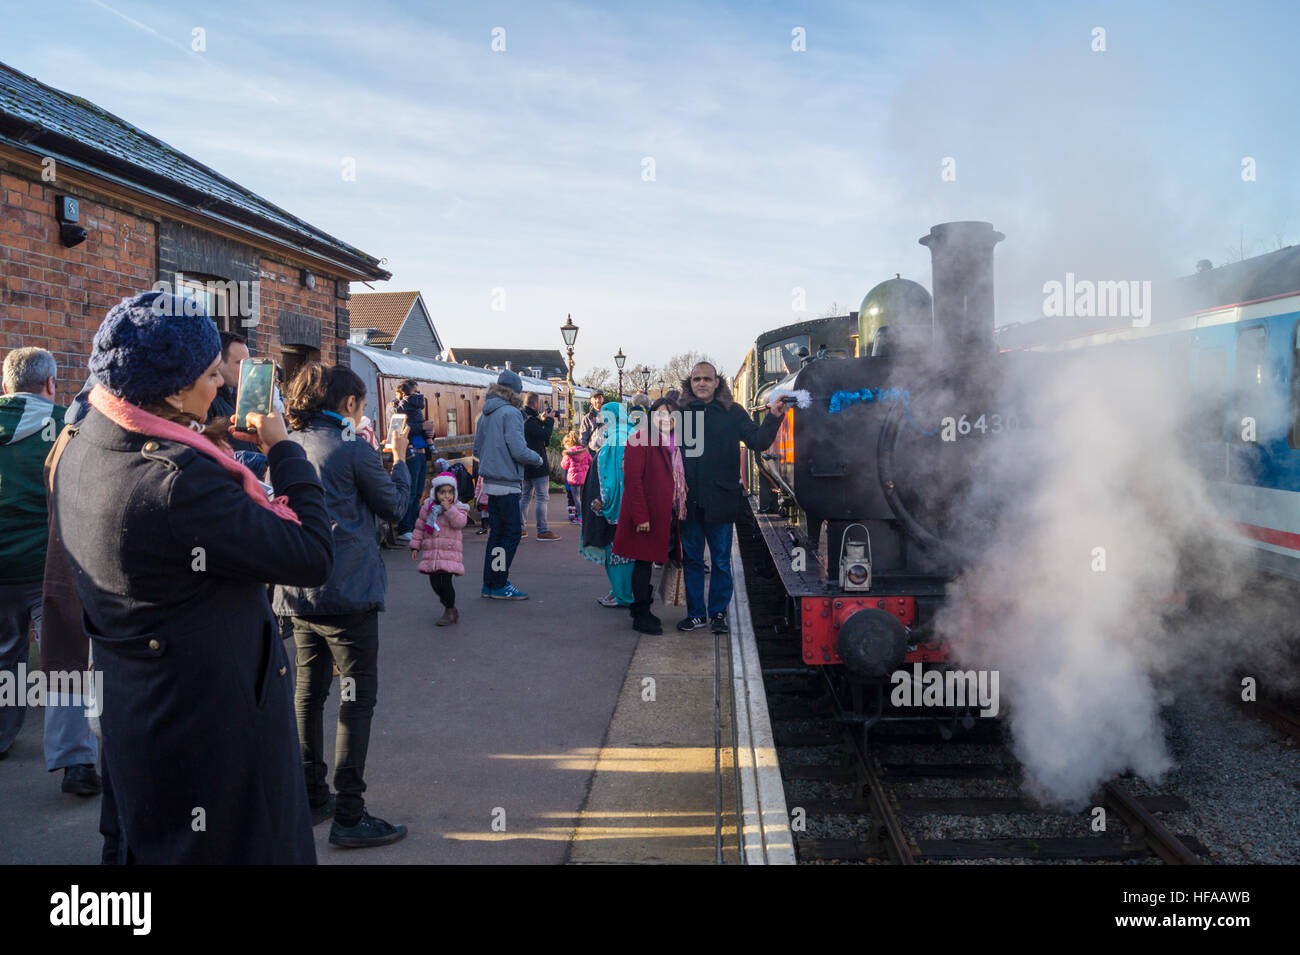 Passengers posing for photographs by GWR steam train at Ongar station, Epping Ongar Railway, Essex, England Stock Photo